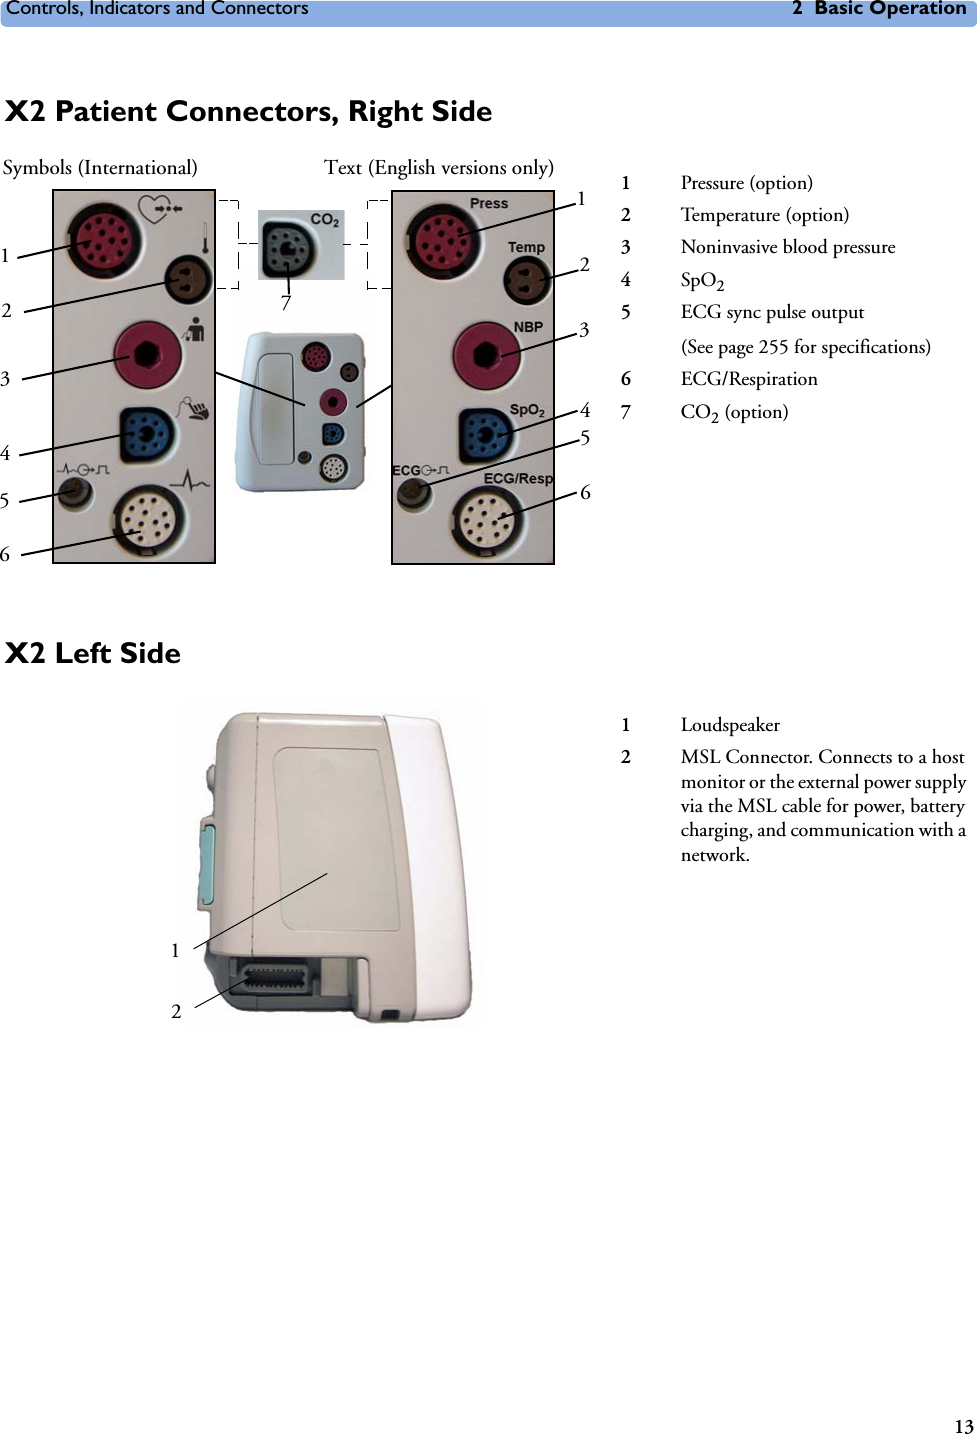 Controls, Indicators and Connectors 2 Basic Operation13X2 Patient Connectors, Right Side1Pressure (option)2Temperature (option)3Noninvasive blood pressure4SpO25ECG sync pulse output(See page 255 for specifications)6ECG/Respiration7CO2 (option)1243654321123456Symbols (International) Text (English versions only)7X2 Left Side1Loudspeaker2MSL Connector. Connects to a host monitor or the external power supply via the MSL cable for power, battery charging, and communication with a network.21